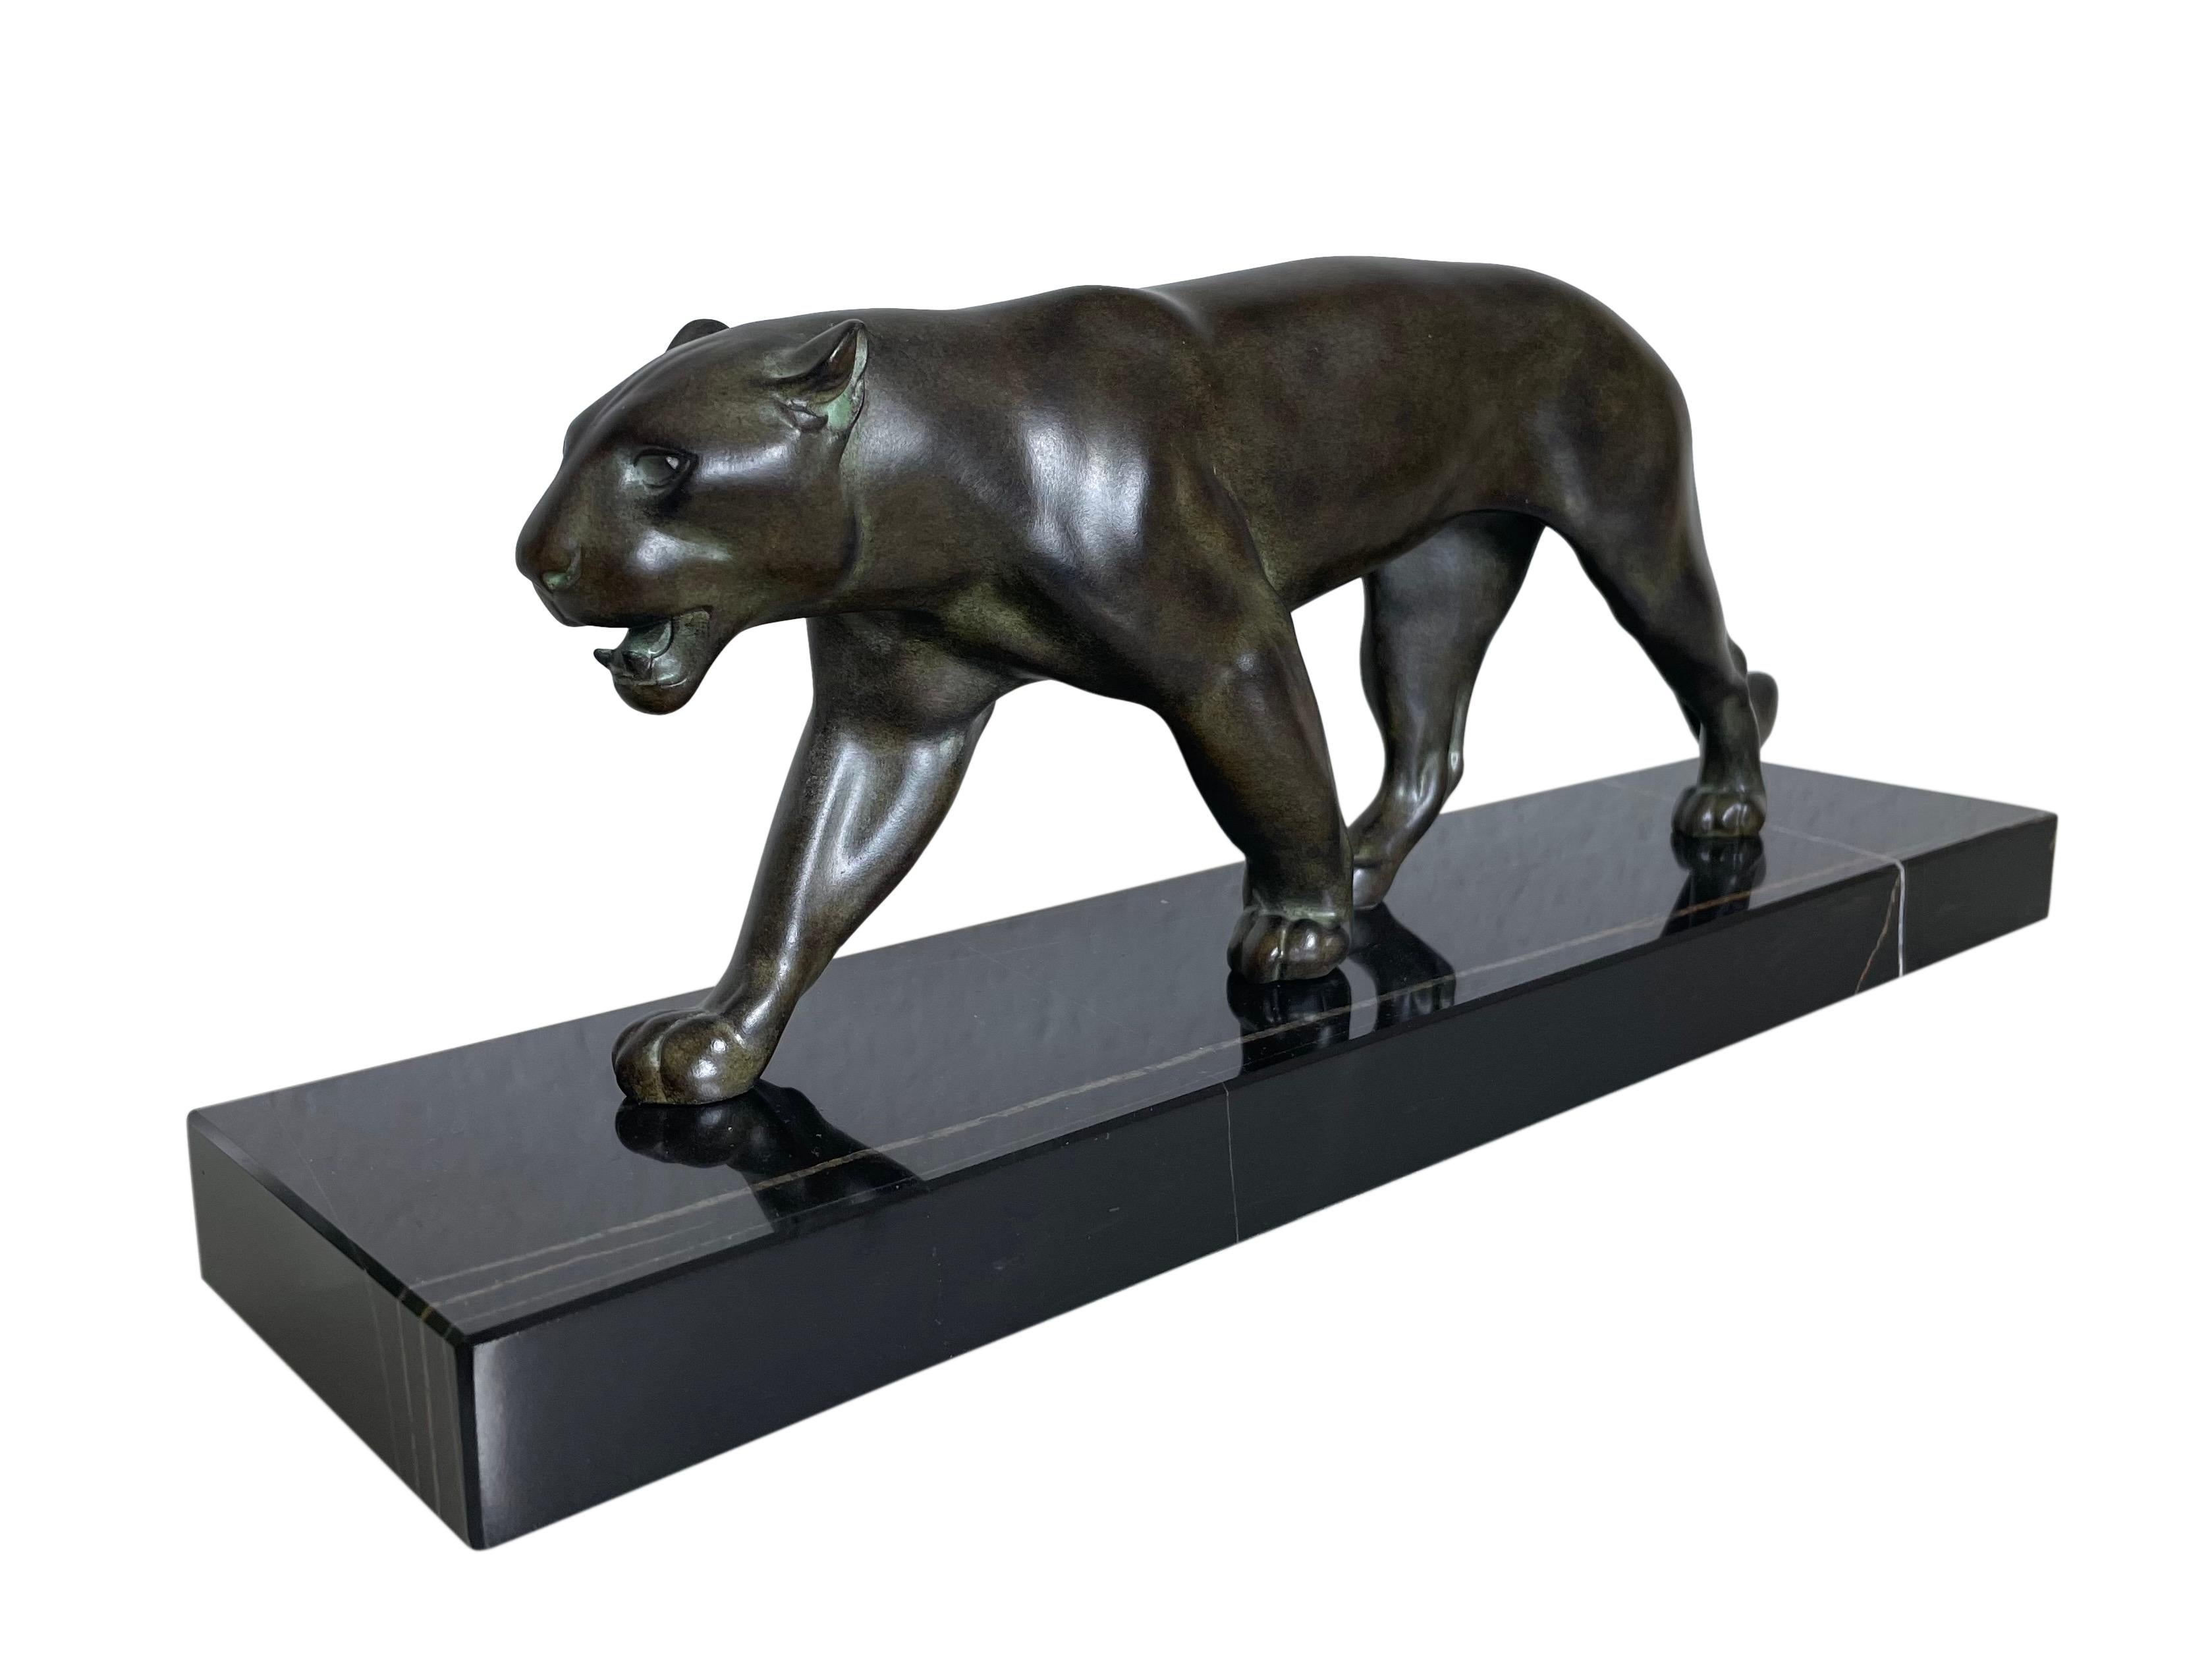 Lion or panther sculpture named “Ouganda”
Original “Max Le Verrier”, signed
Art Deco style, France 

Materials: patinated spelter (French: régule), marble base
Socle could have a different marbleization than the picture
Green patina, handwork